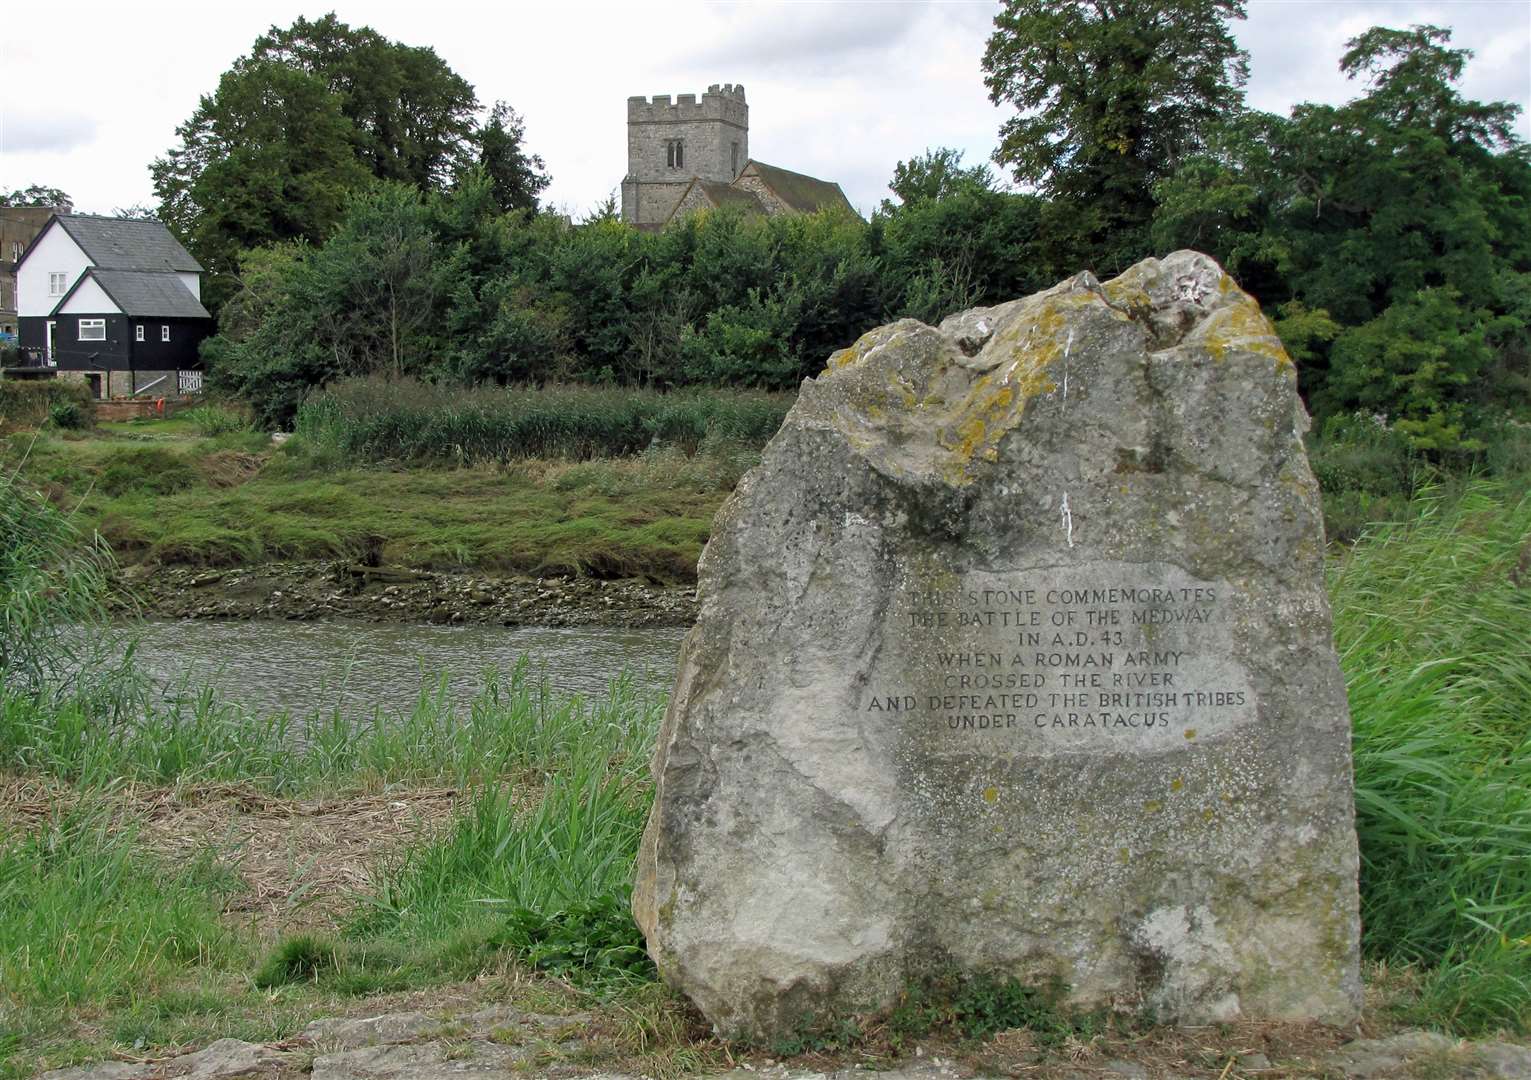 This stone at Burham Marshes, with All Saints Church at Snodland seen behind, commemorates "The Battle Of The Medway" in AD43. Image: Brian Henman